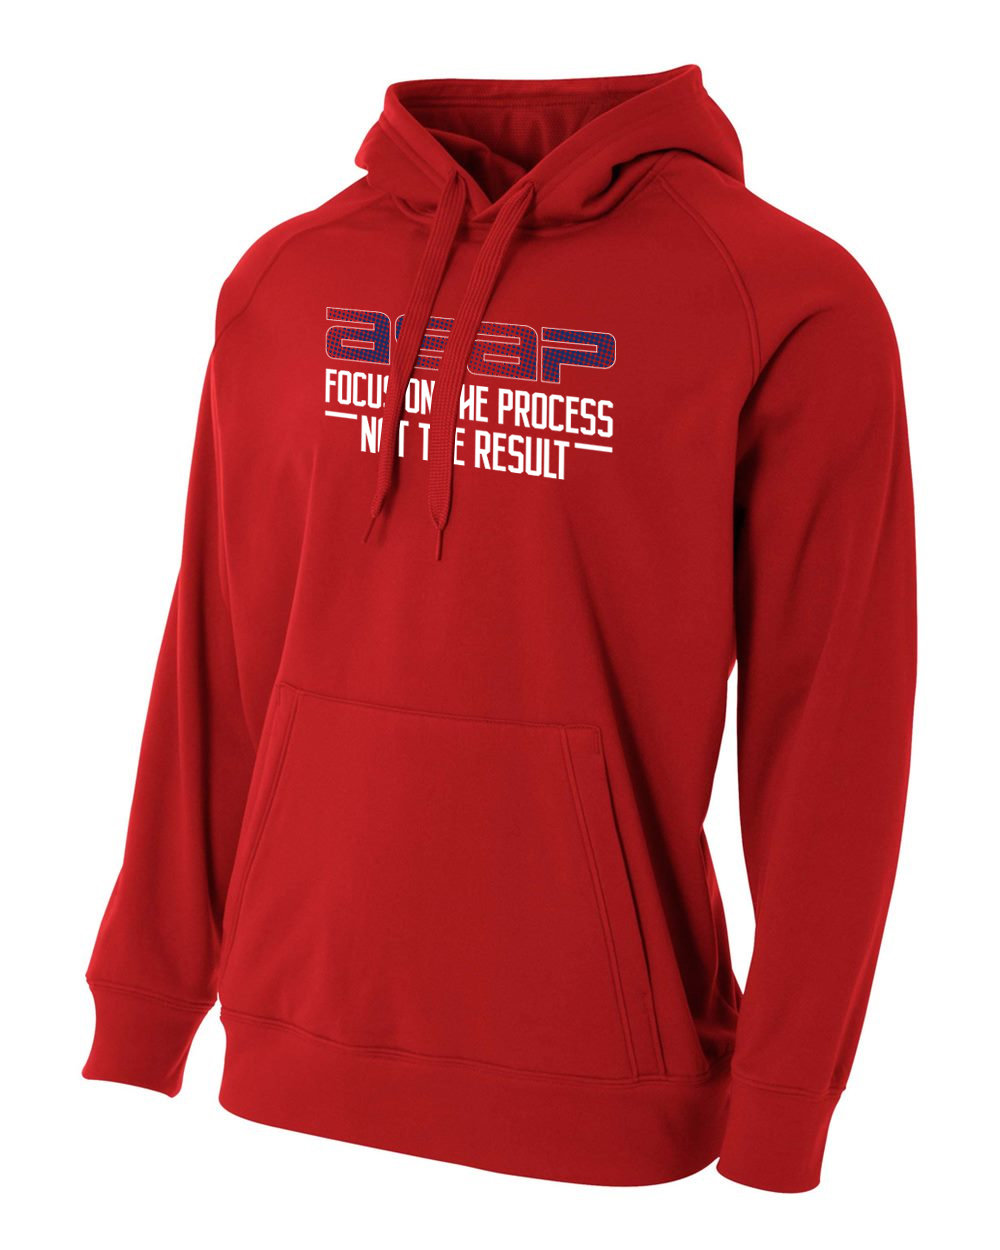 YOUTH ASAP Focus on the Process Not the Results Solid Tech Fleece Hoodie